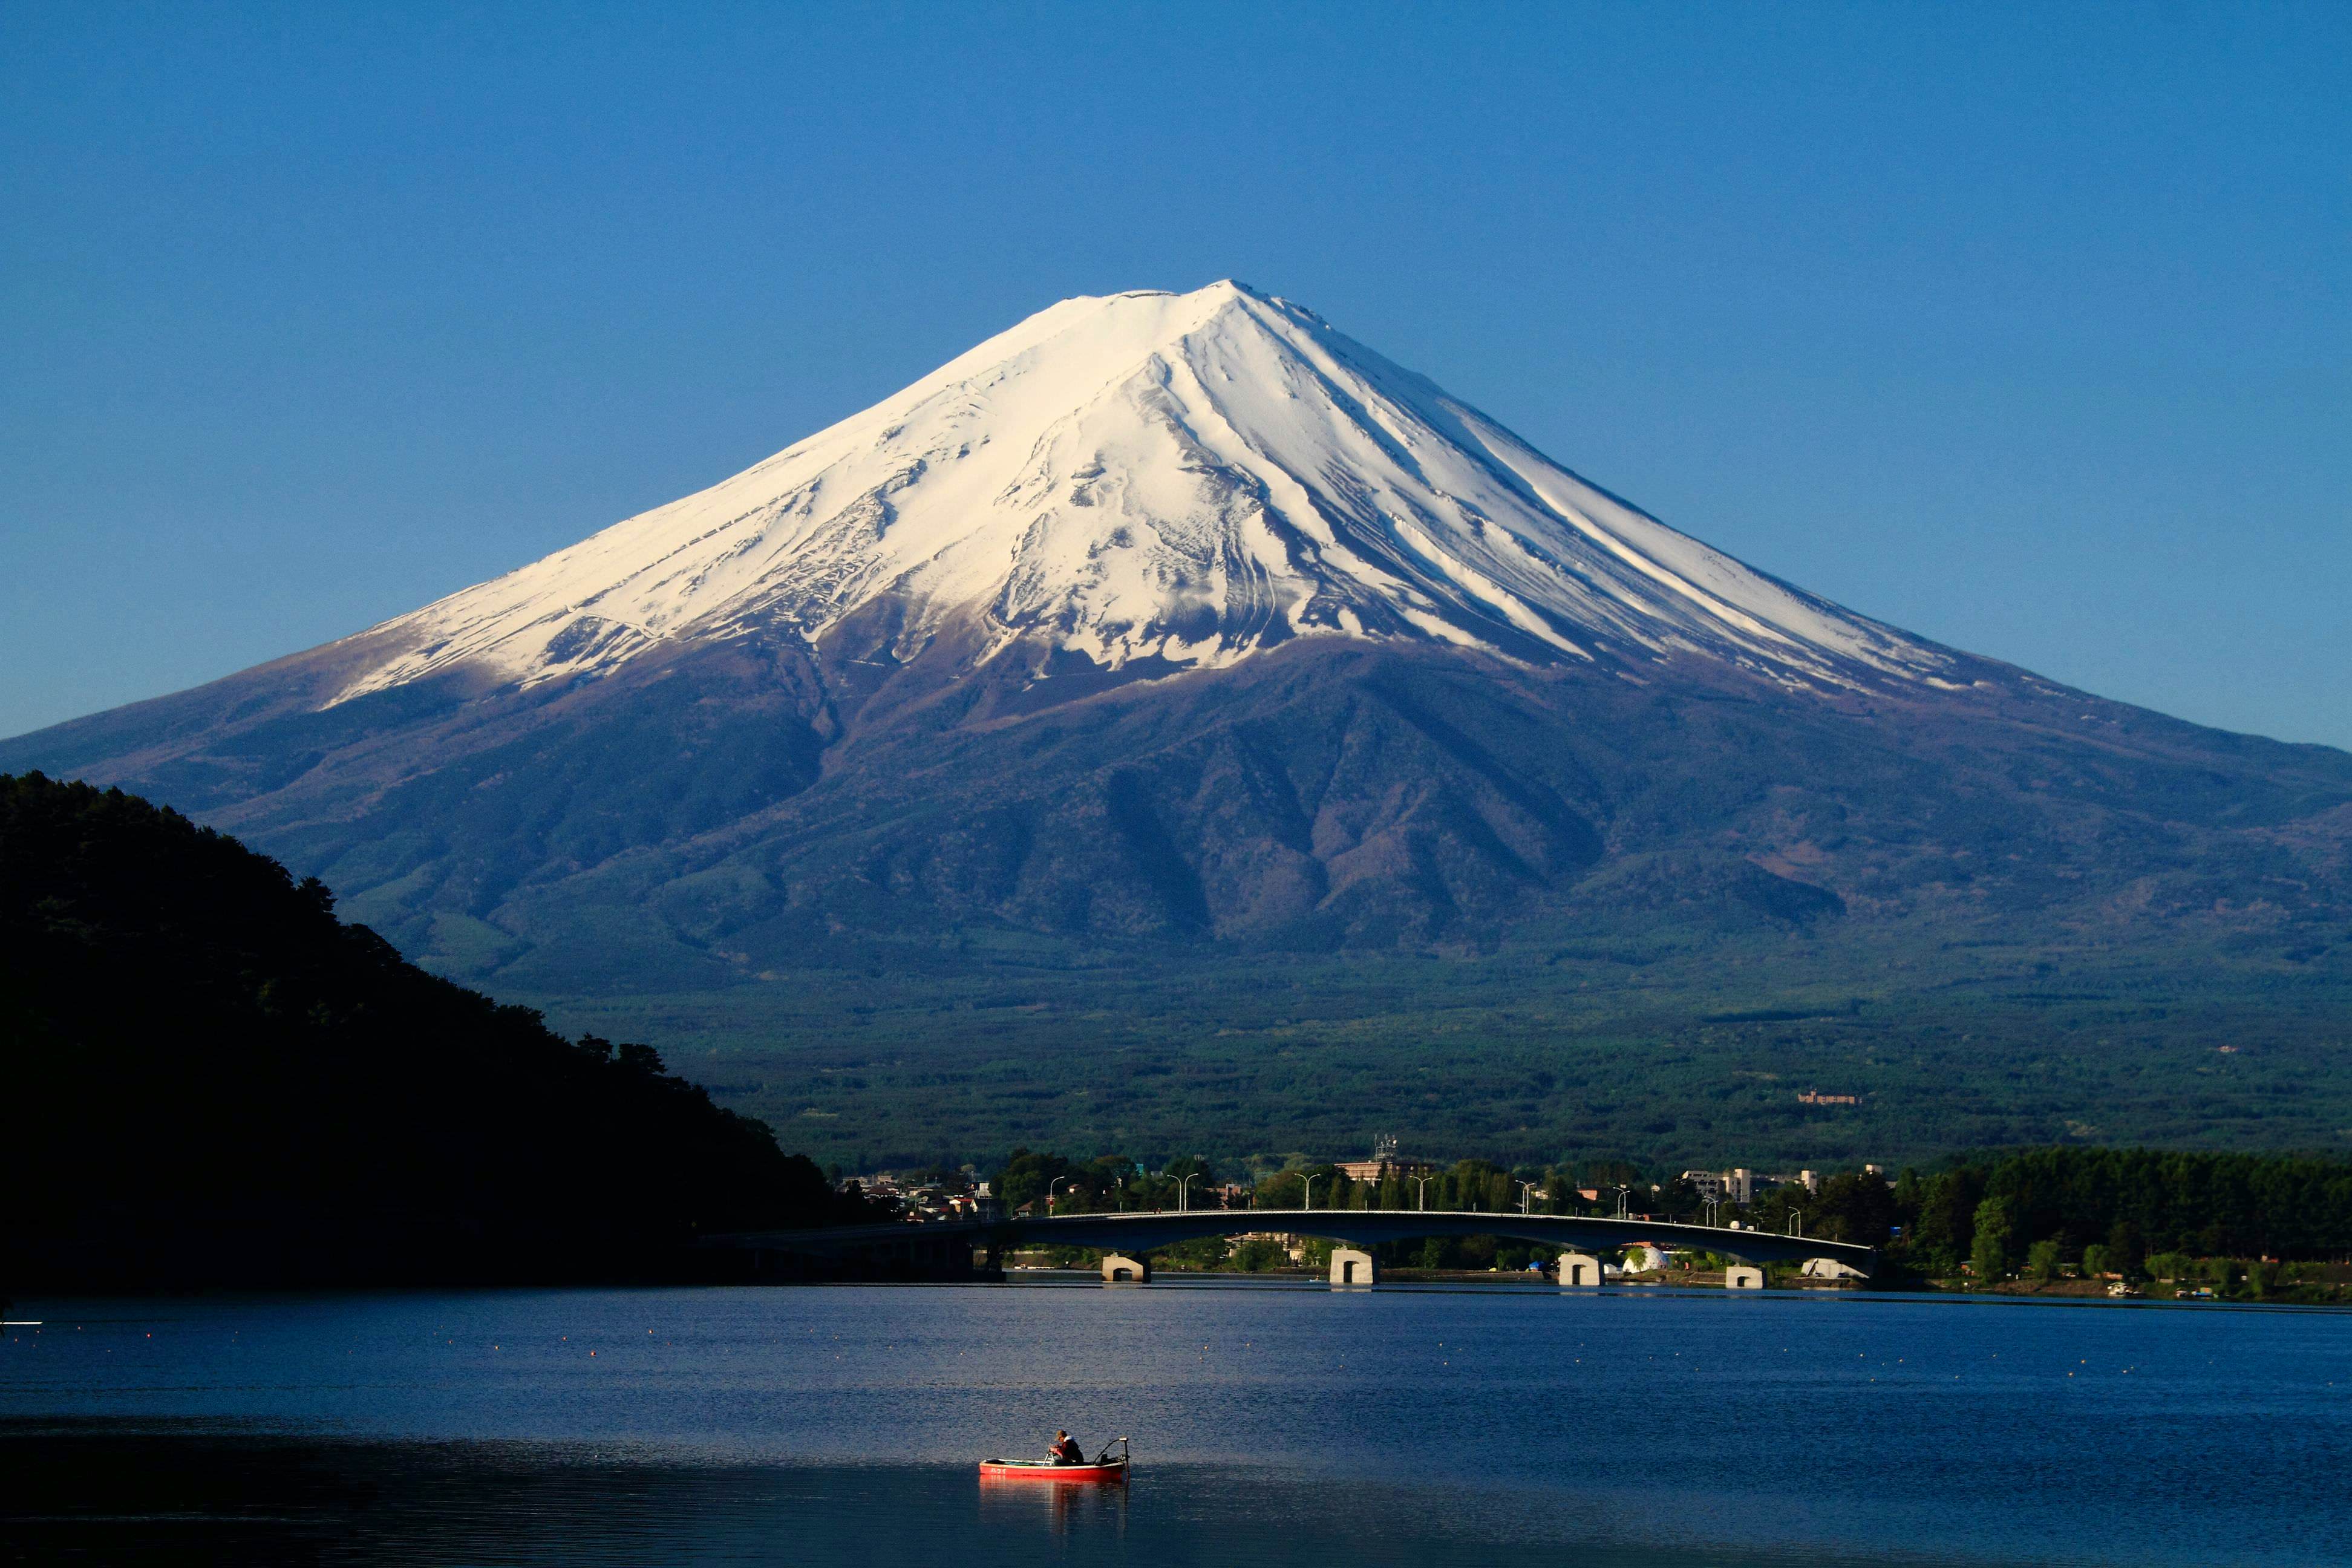 Visit Mt Fuji on your own (Recommended with JR Pass)